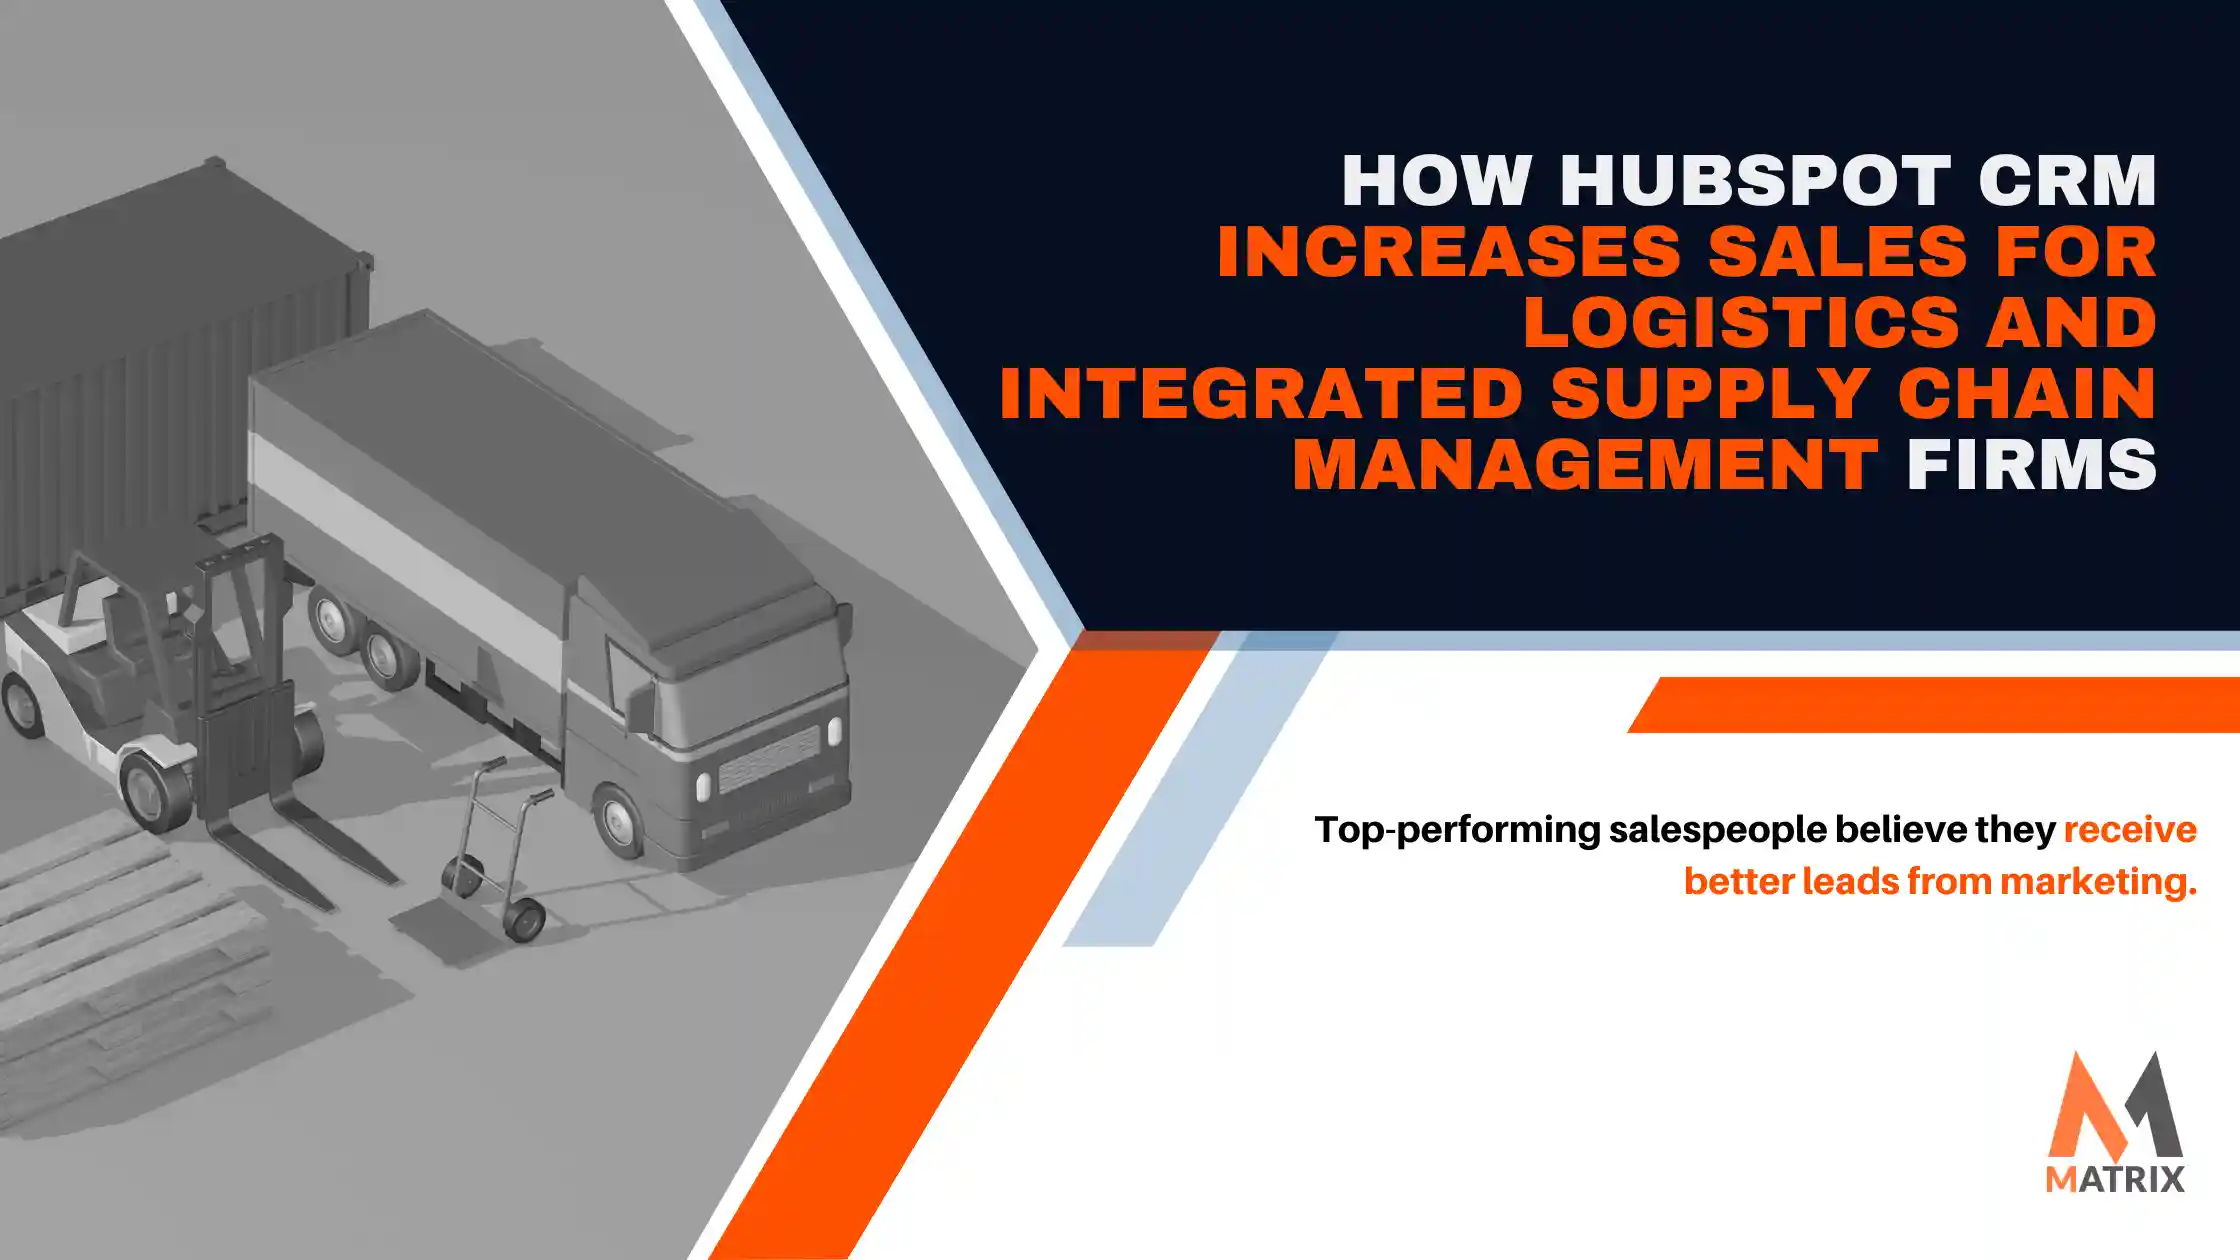 HubSpot CRM Increases Sales Logistics and Supply Chain Management Firms